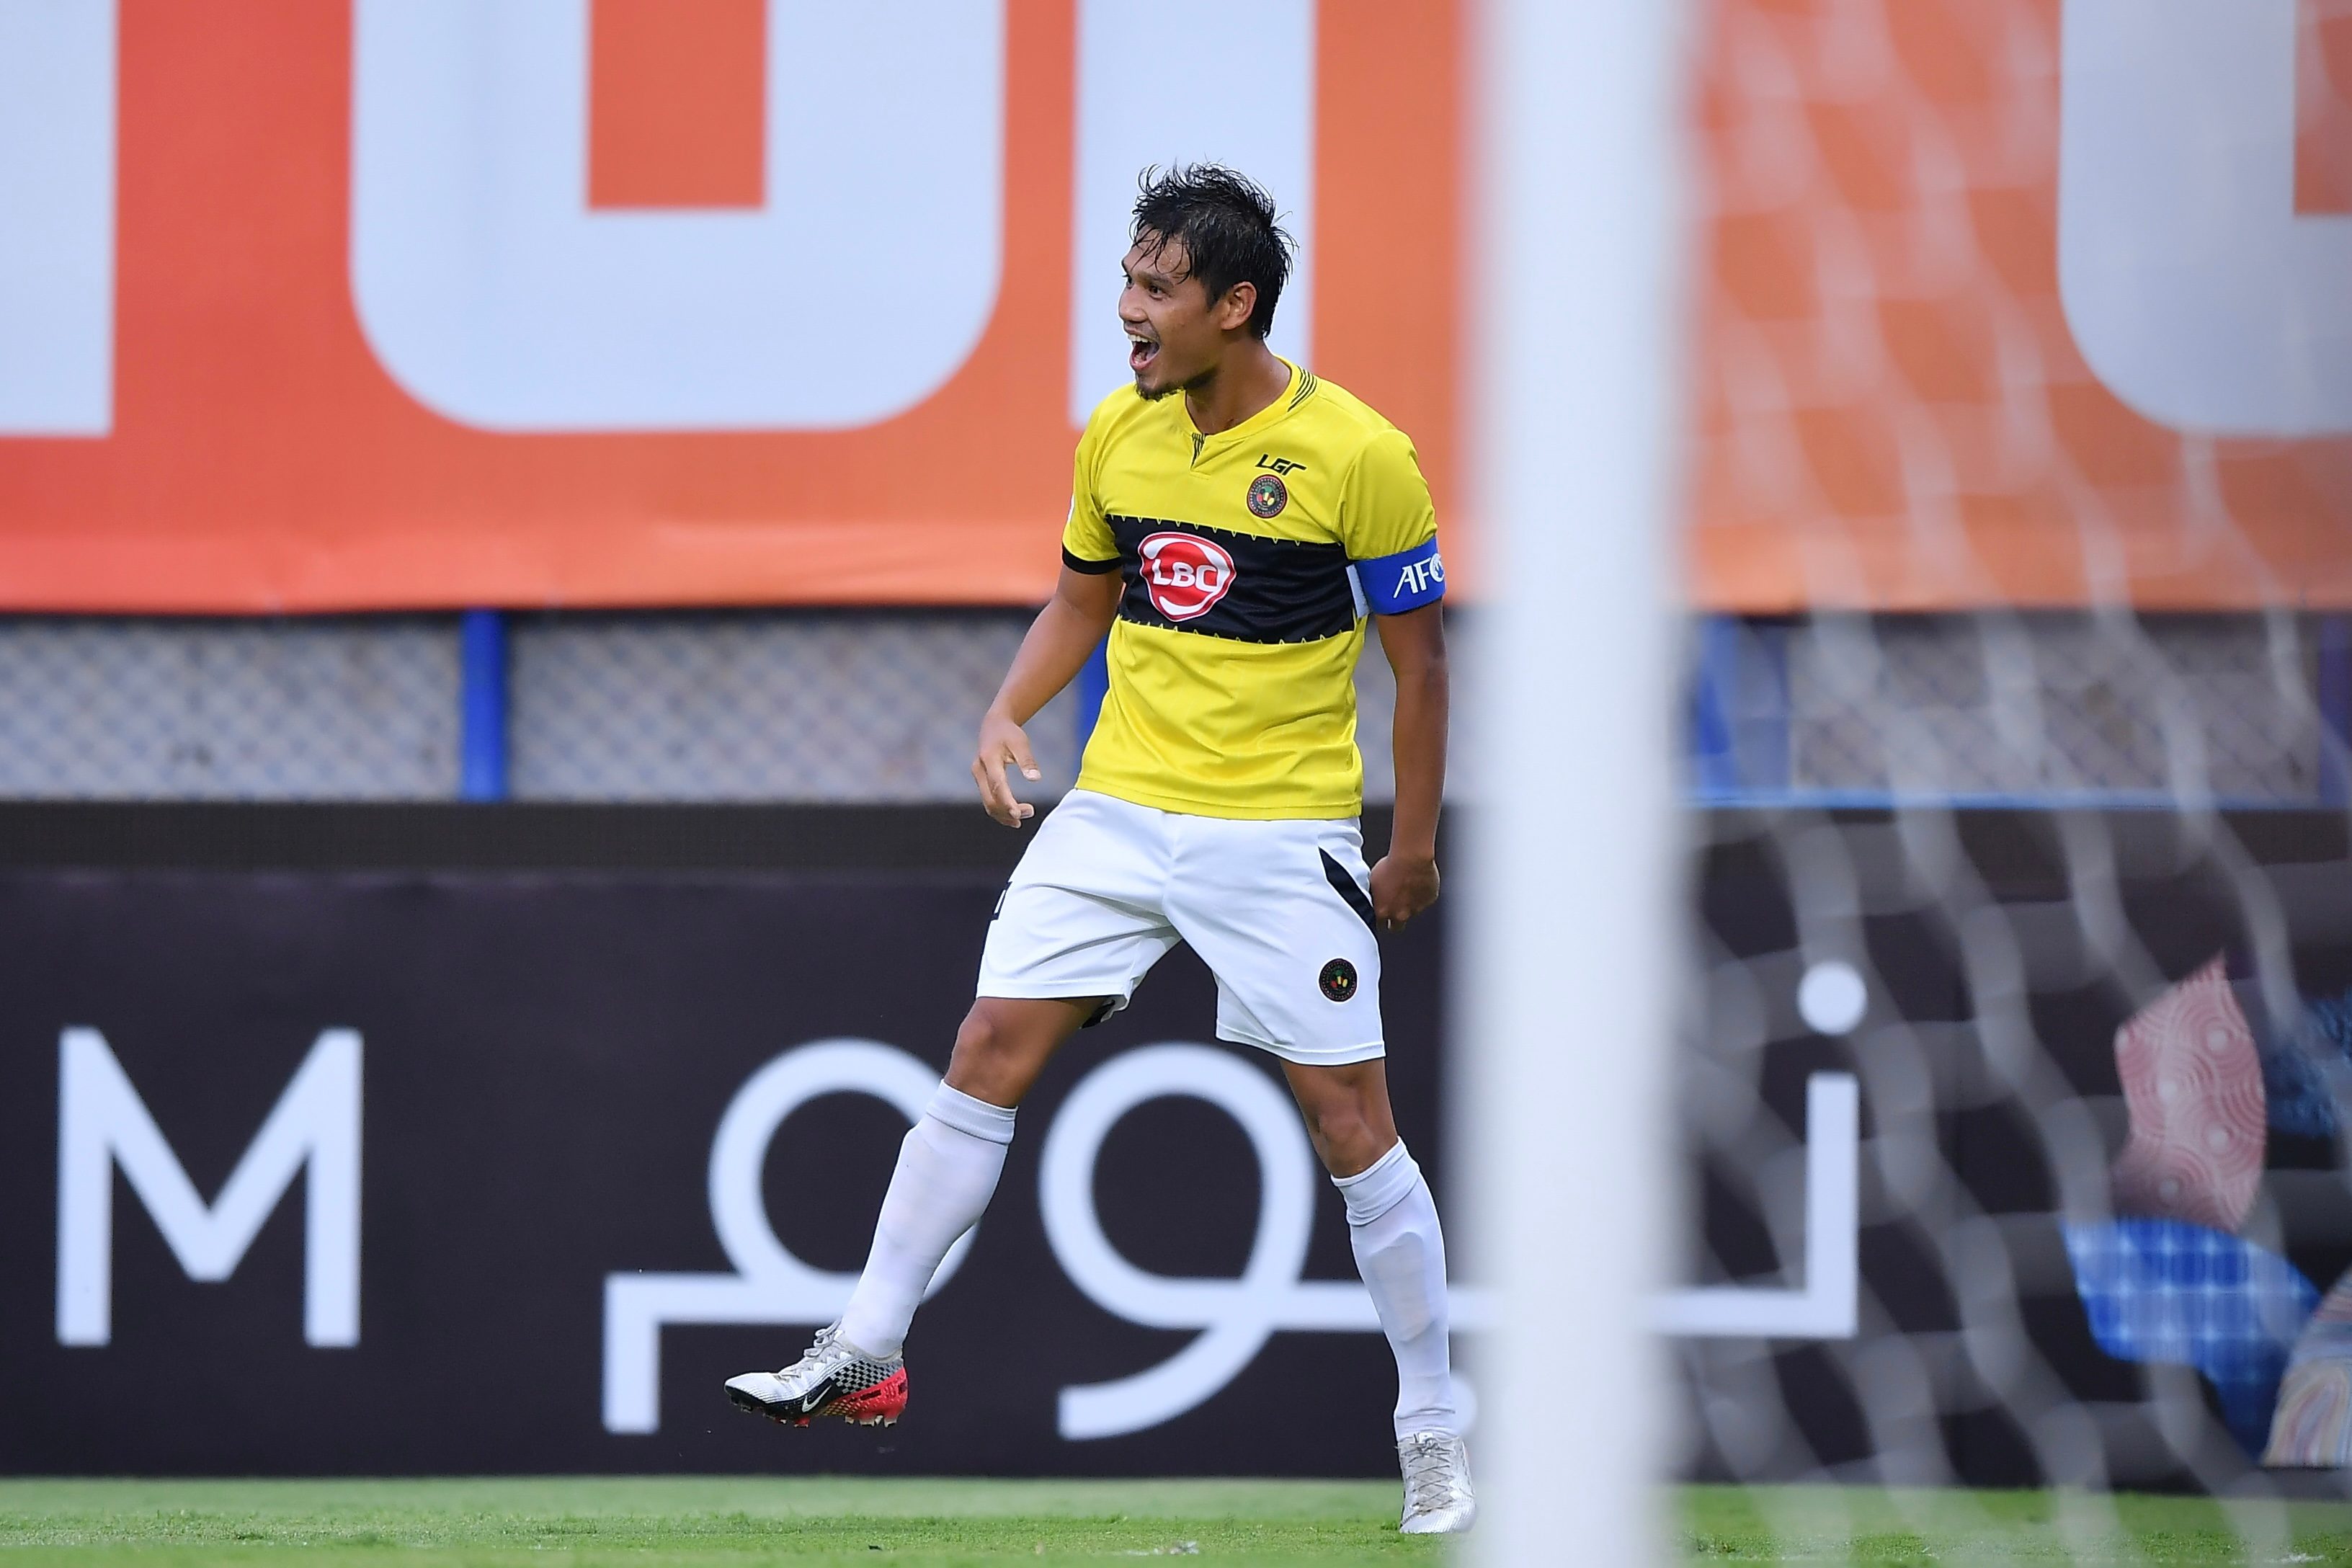 Bedic impresses as PH clubs still look for 1st win in AFC Champions League